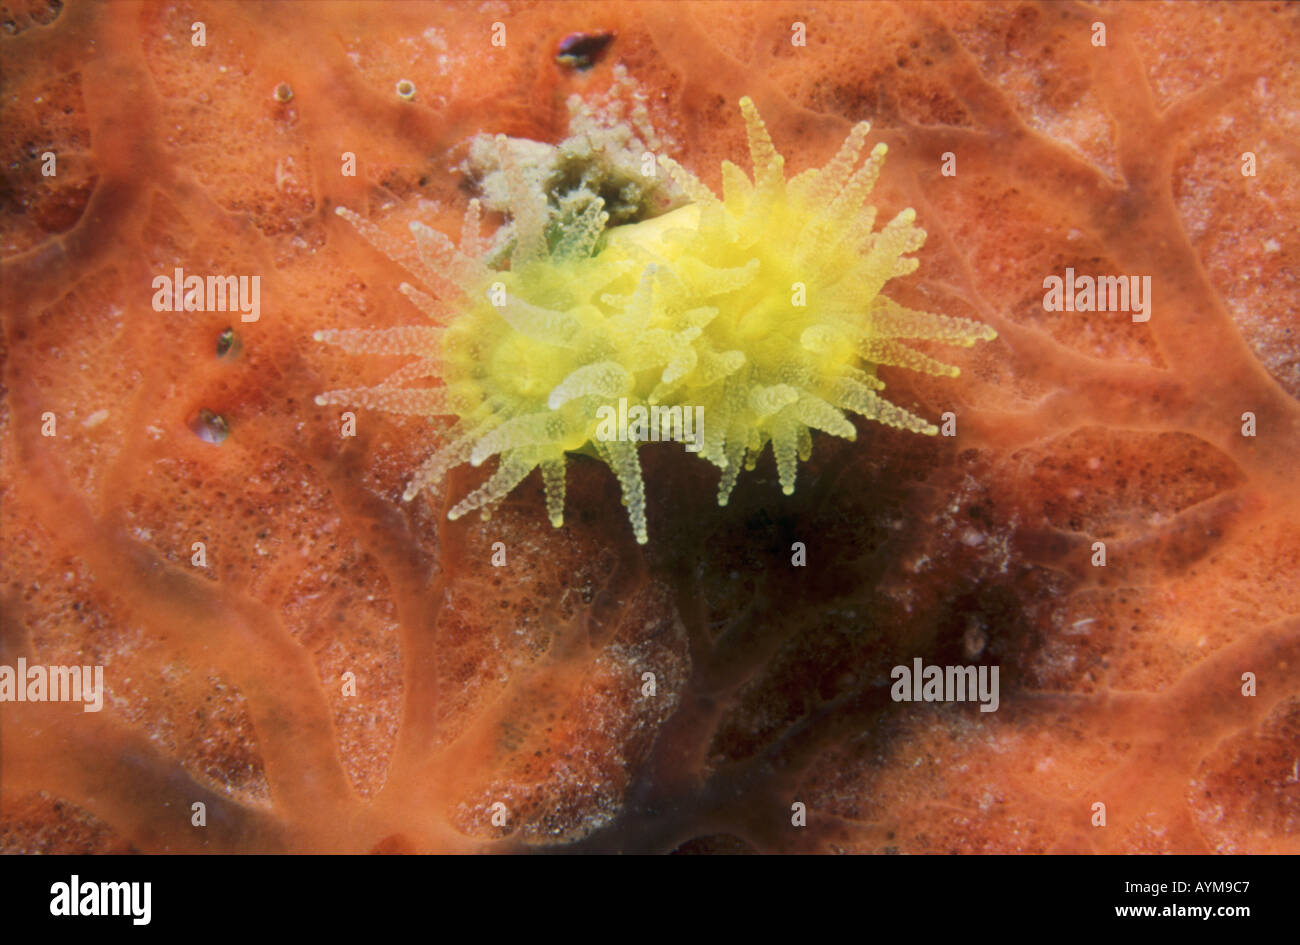 Two polyps of Scarlet and gold Star Coral surrounded by orange encrusting sponge Balanophyllia regia. Stock Photo